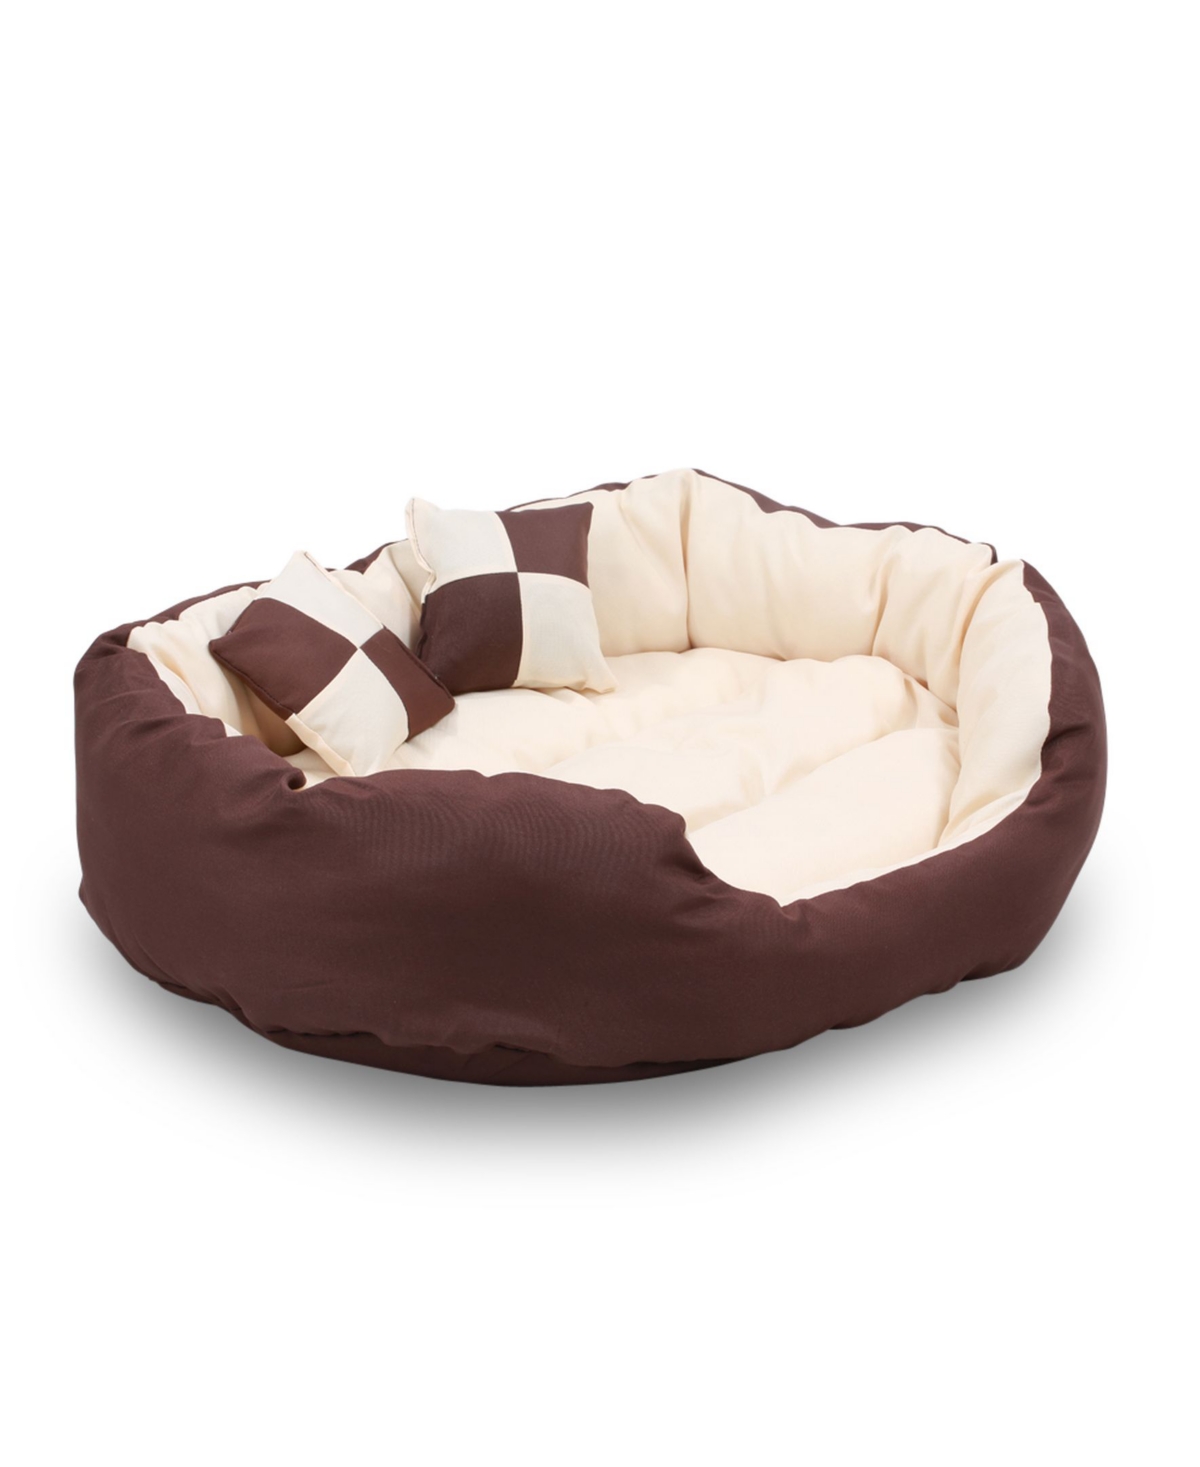 Happycare Textiles Durable Bolster Sleeper Oval Pet Bed with Removable Reversible Insert Cushion and Additional Two Pillow, 34"x27" - Brown